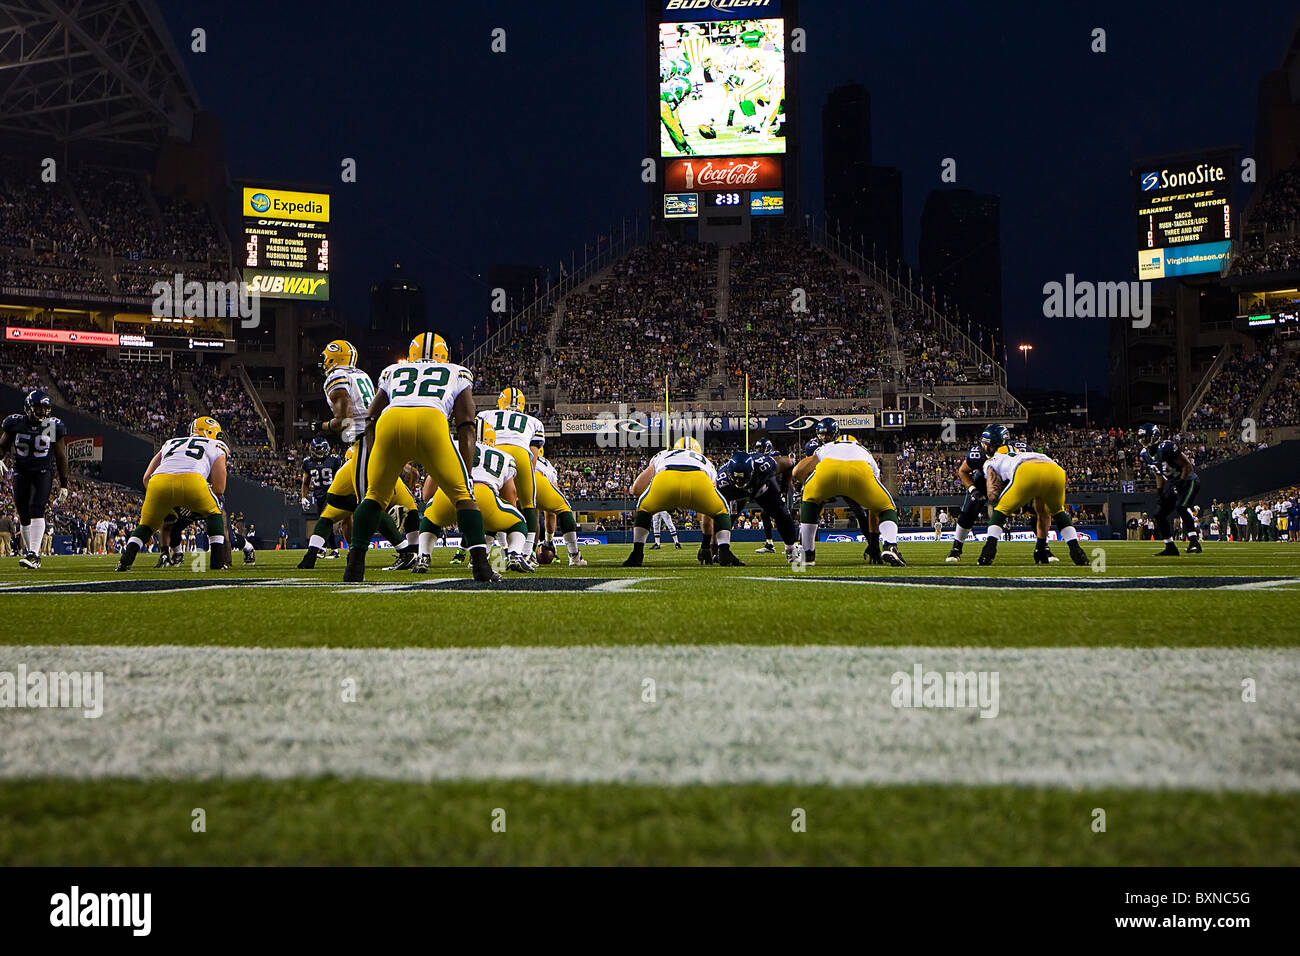 Green Bay Packers playing the Seattle Seahawks at Qwest Field Stock Photo